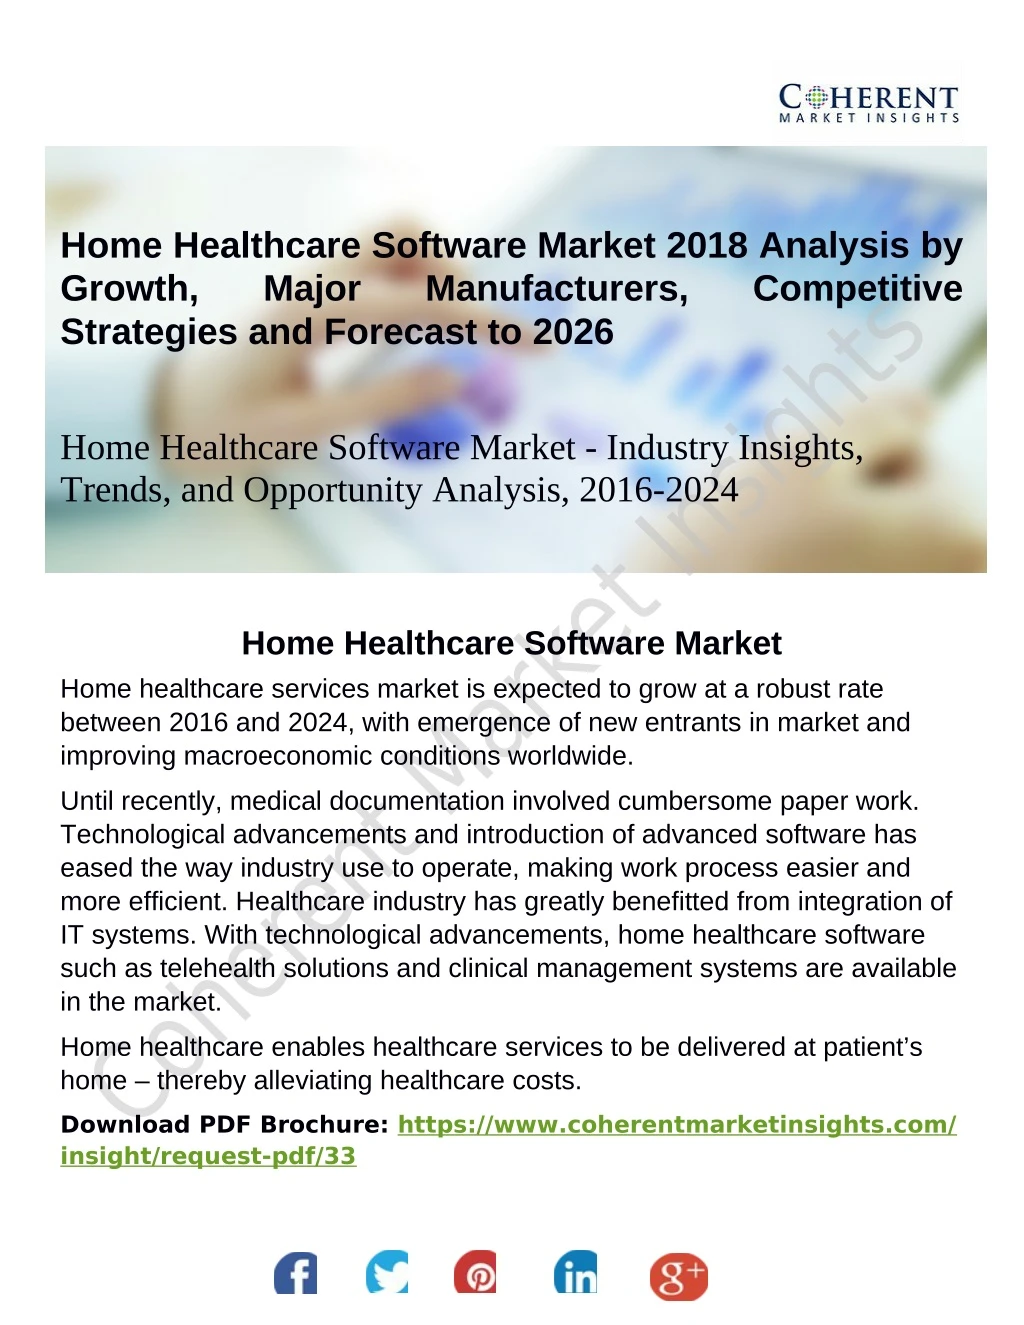 home healthcare software market 2018 analysis